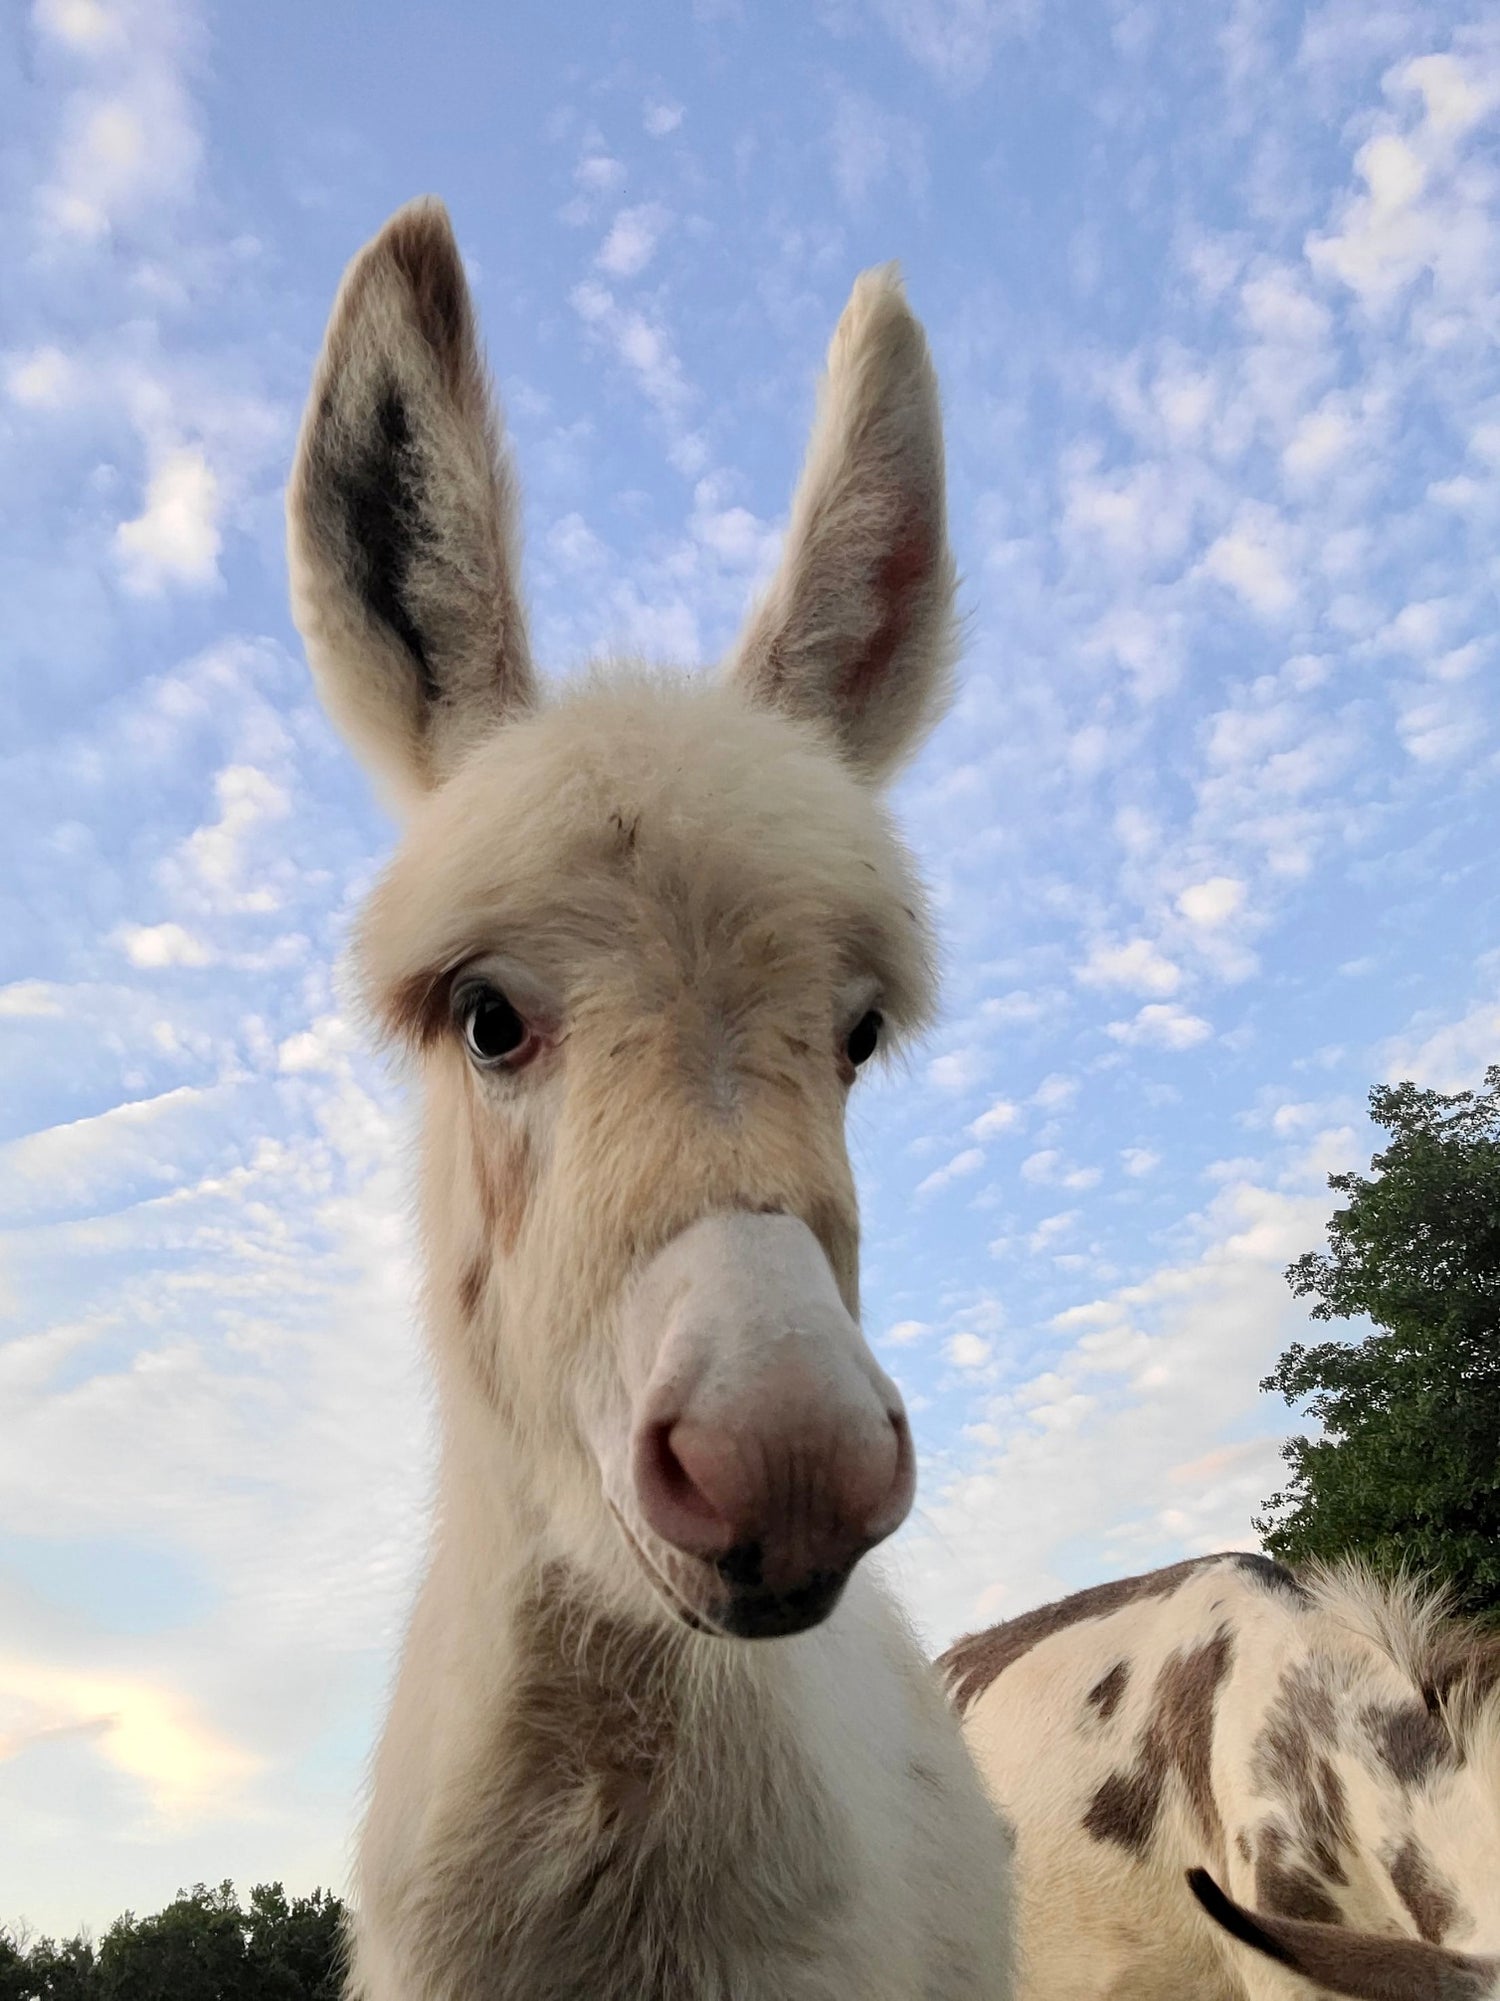 White Baby Donkey with Blue Sky and Clouds